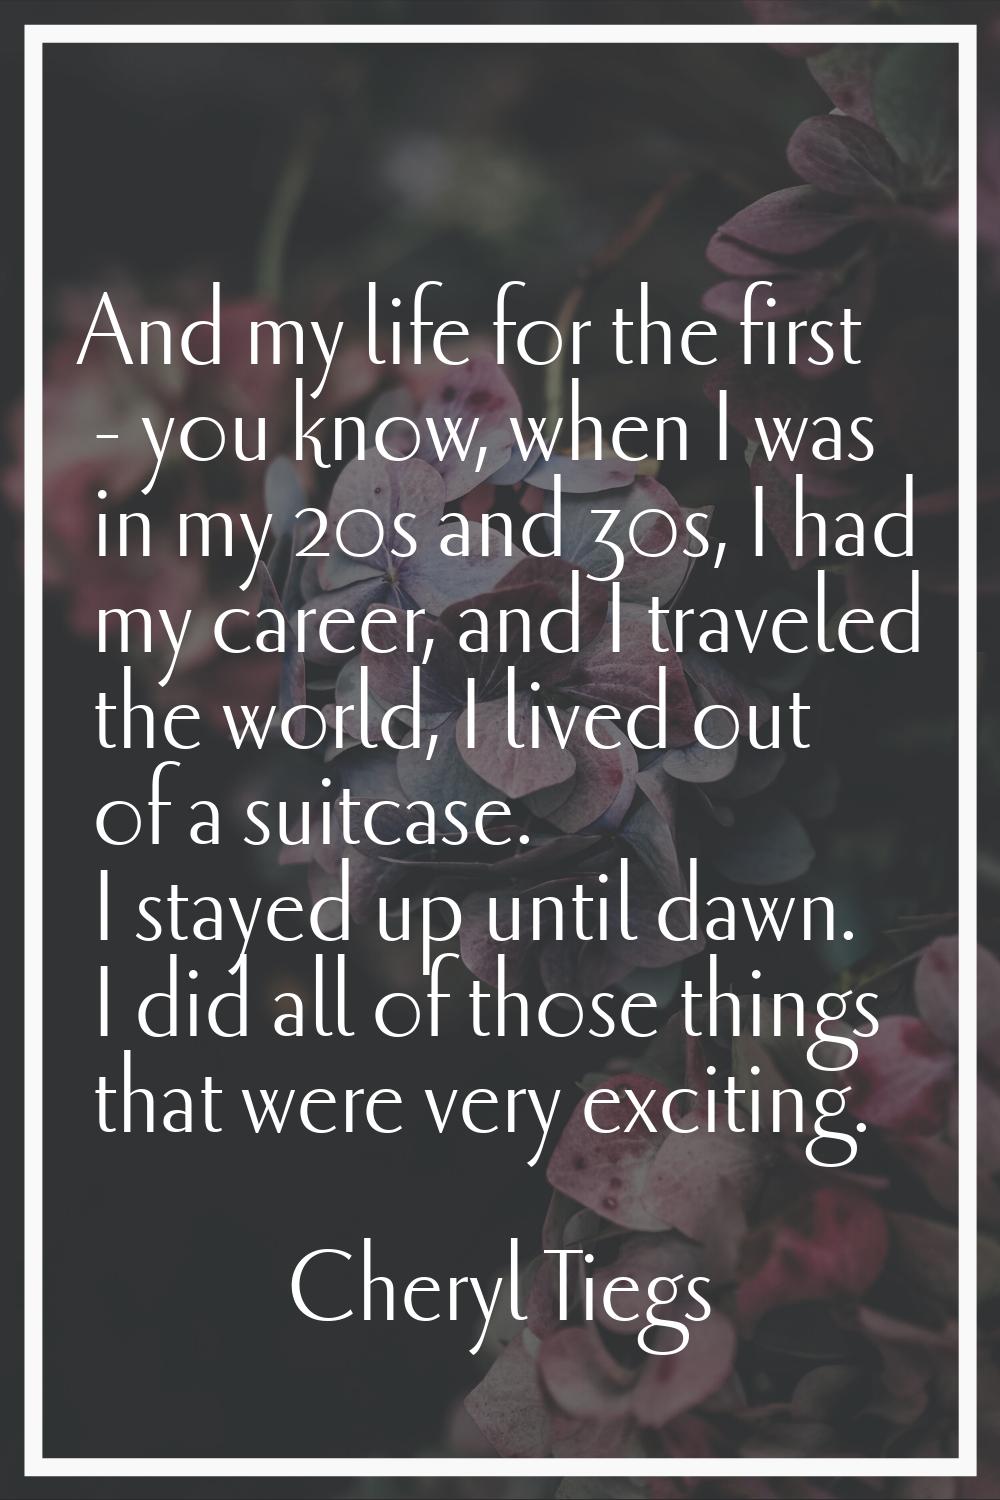 And my life for the first - you know, when I was in my 20s and 30s, I had my career, and I traveled